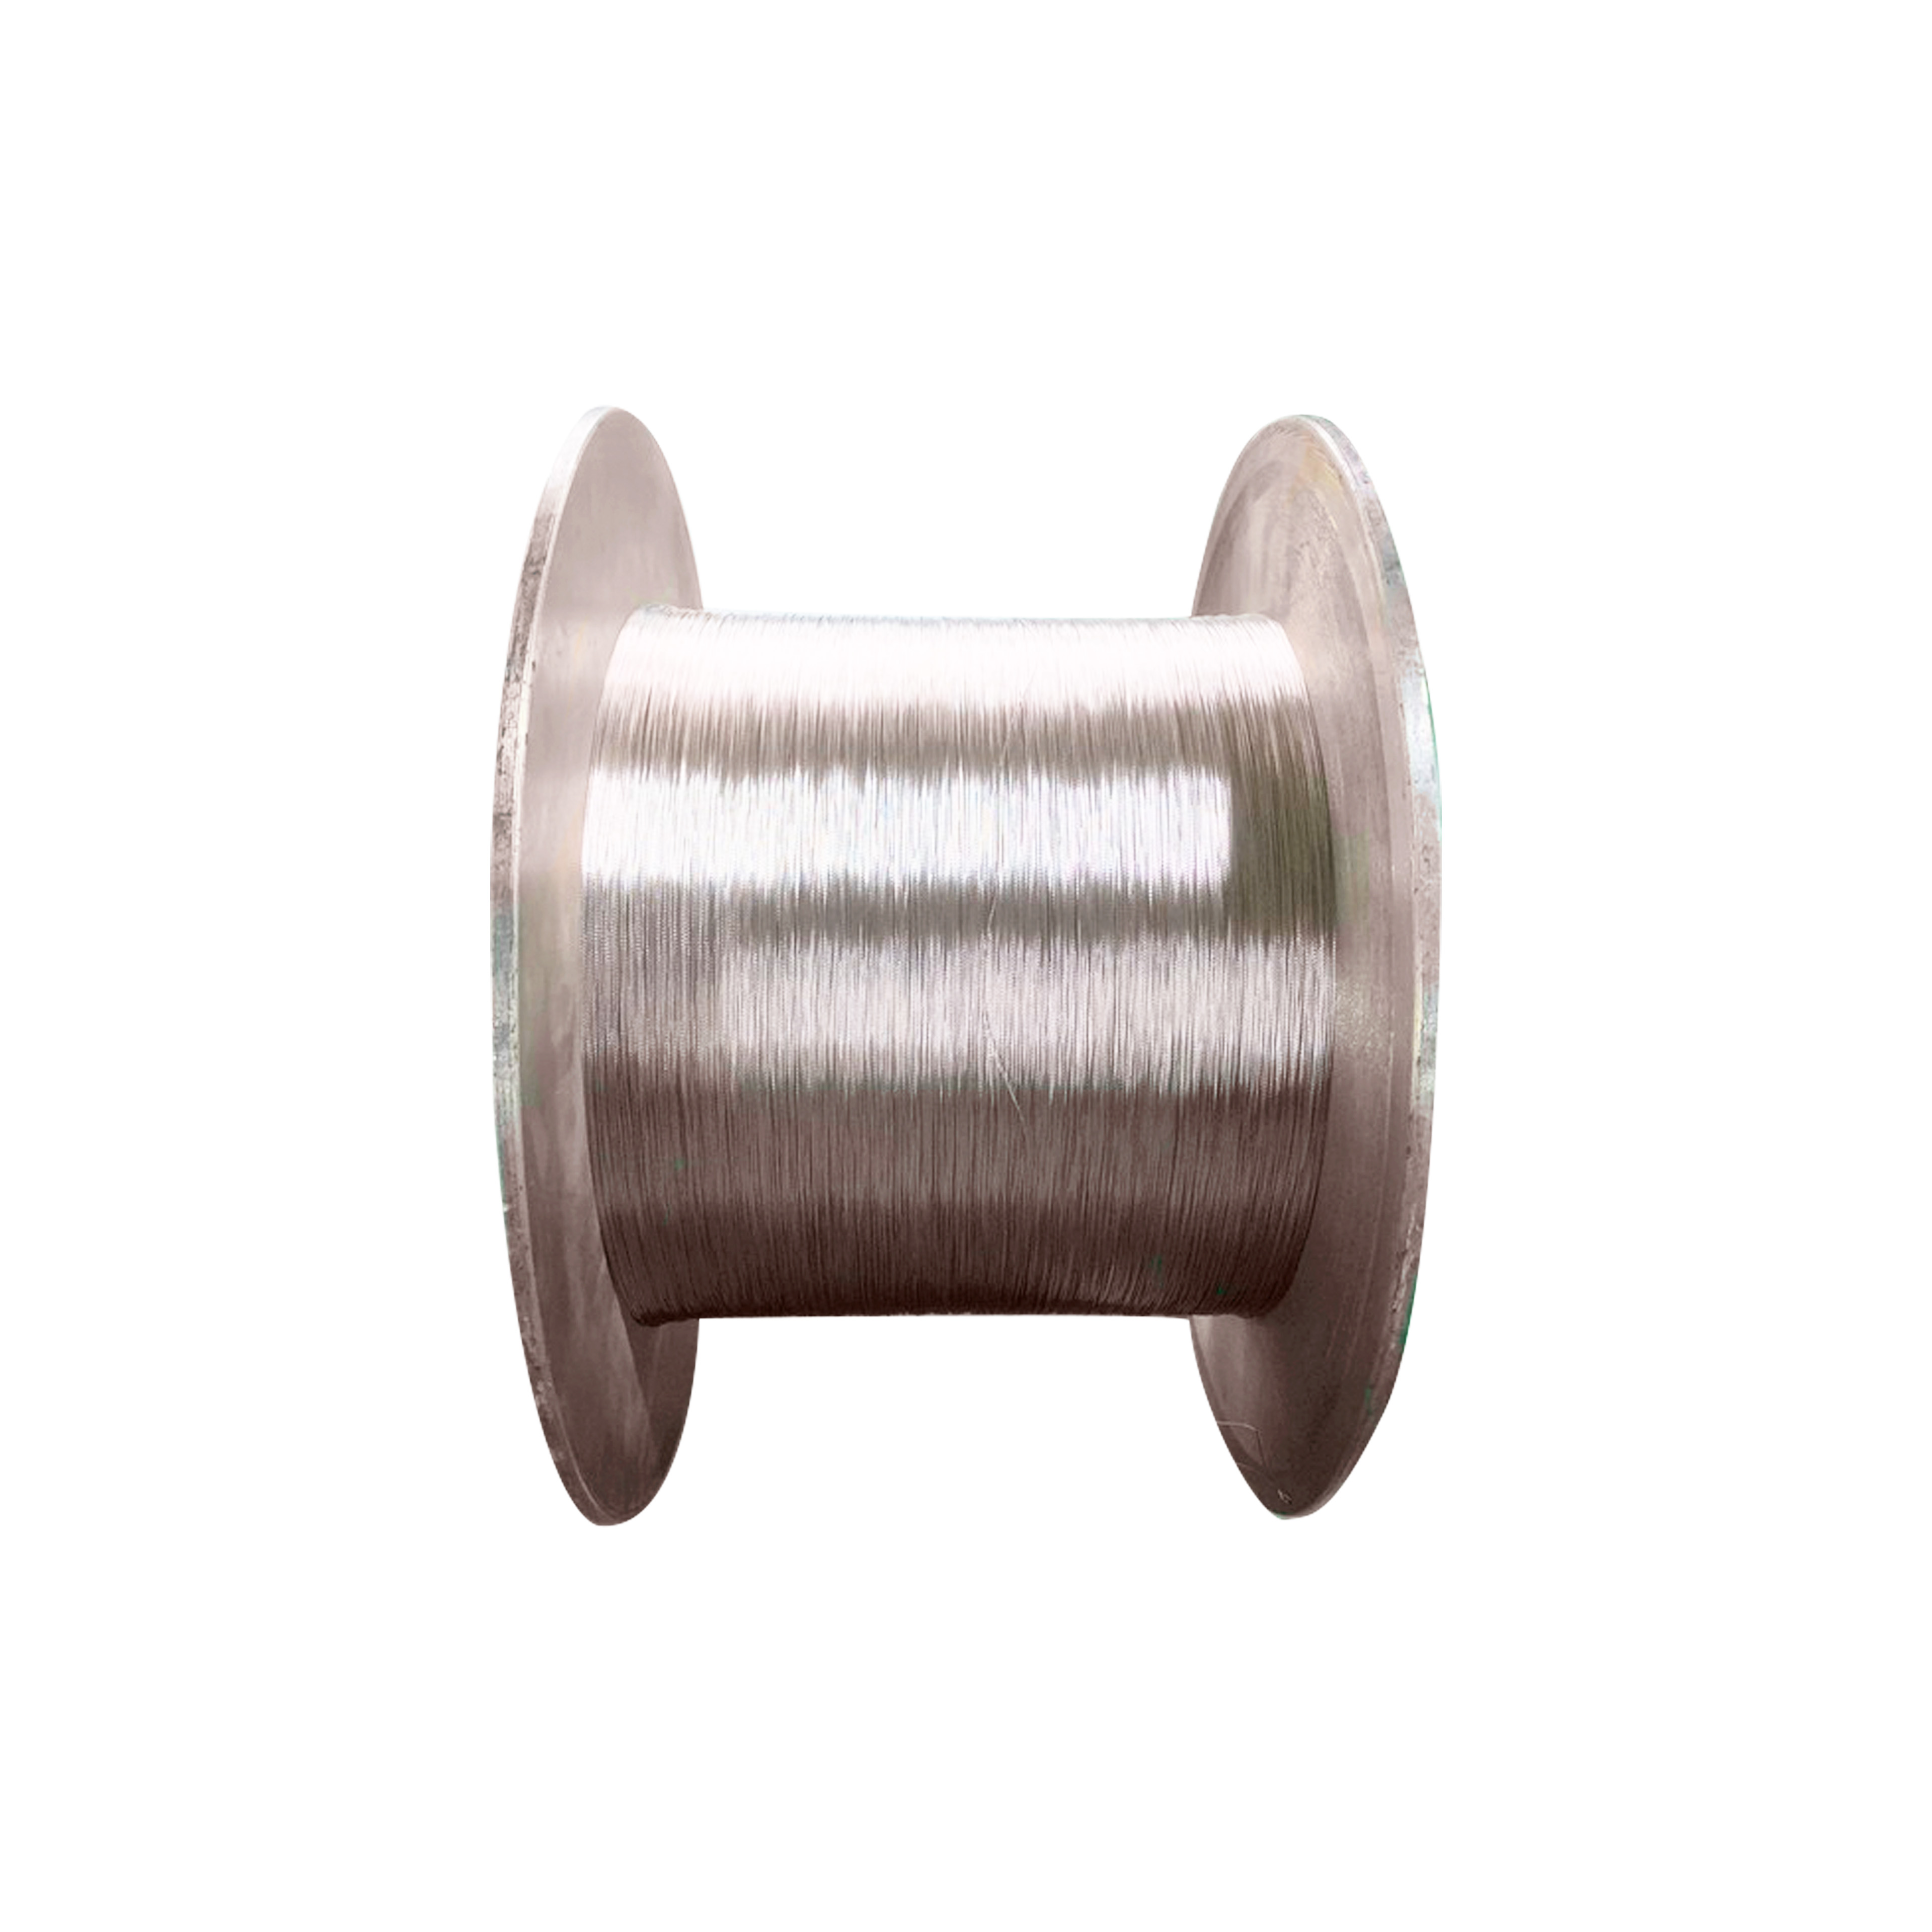 2019 Good Quality Silver Copper Conductor Wire -
 High Conductivity Silver Plated Copper Wire For Transformer – Tianchuang